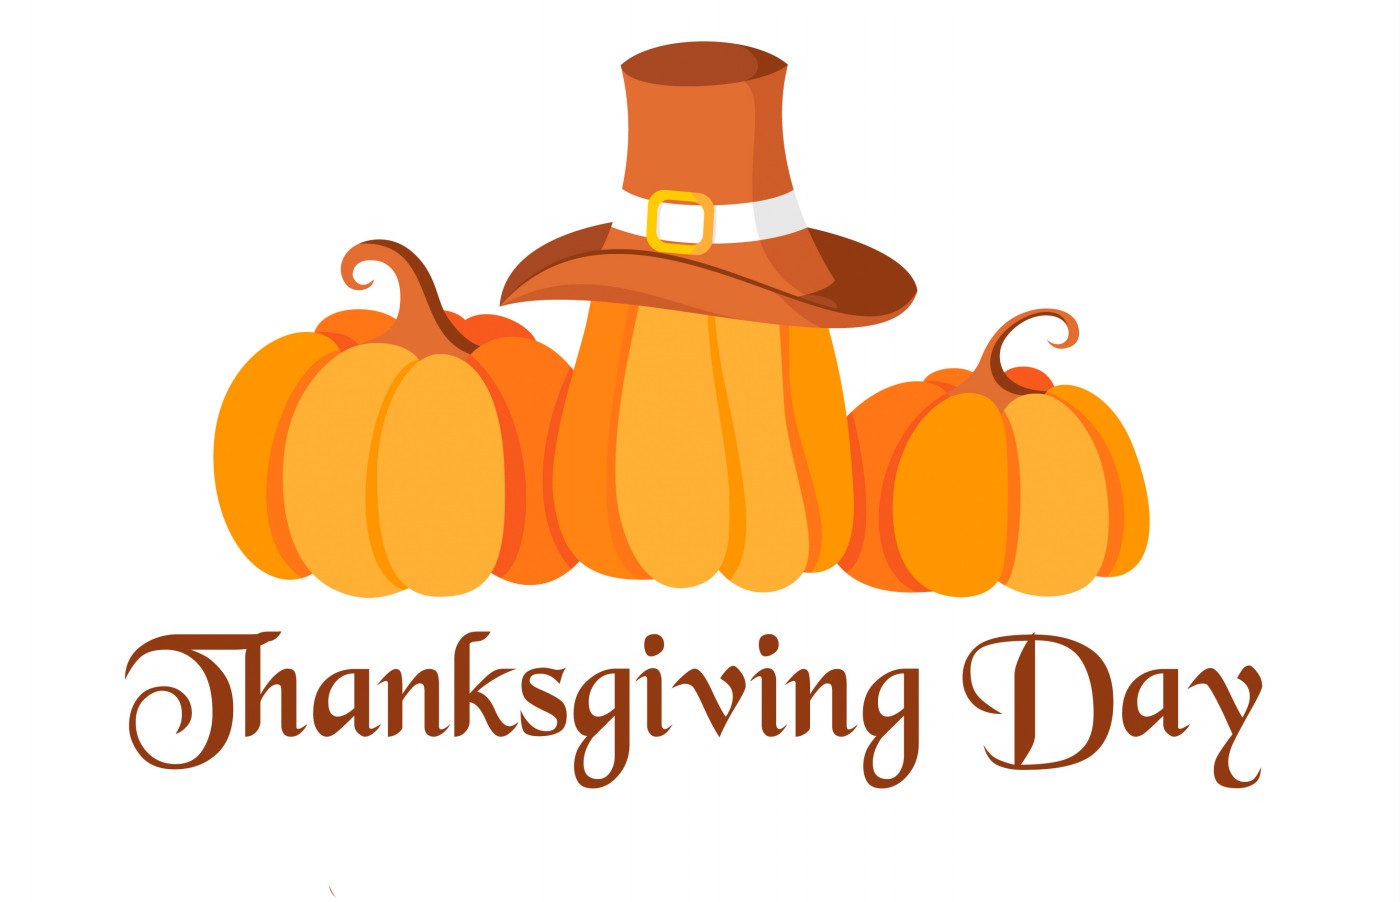 Thanksgiving wallpapers 2013, 2013 Thanksgiving day greetings ...